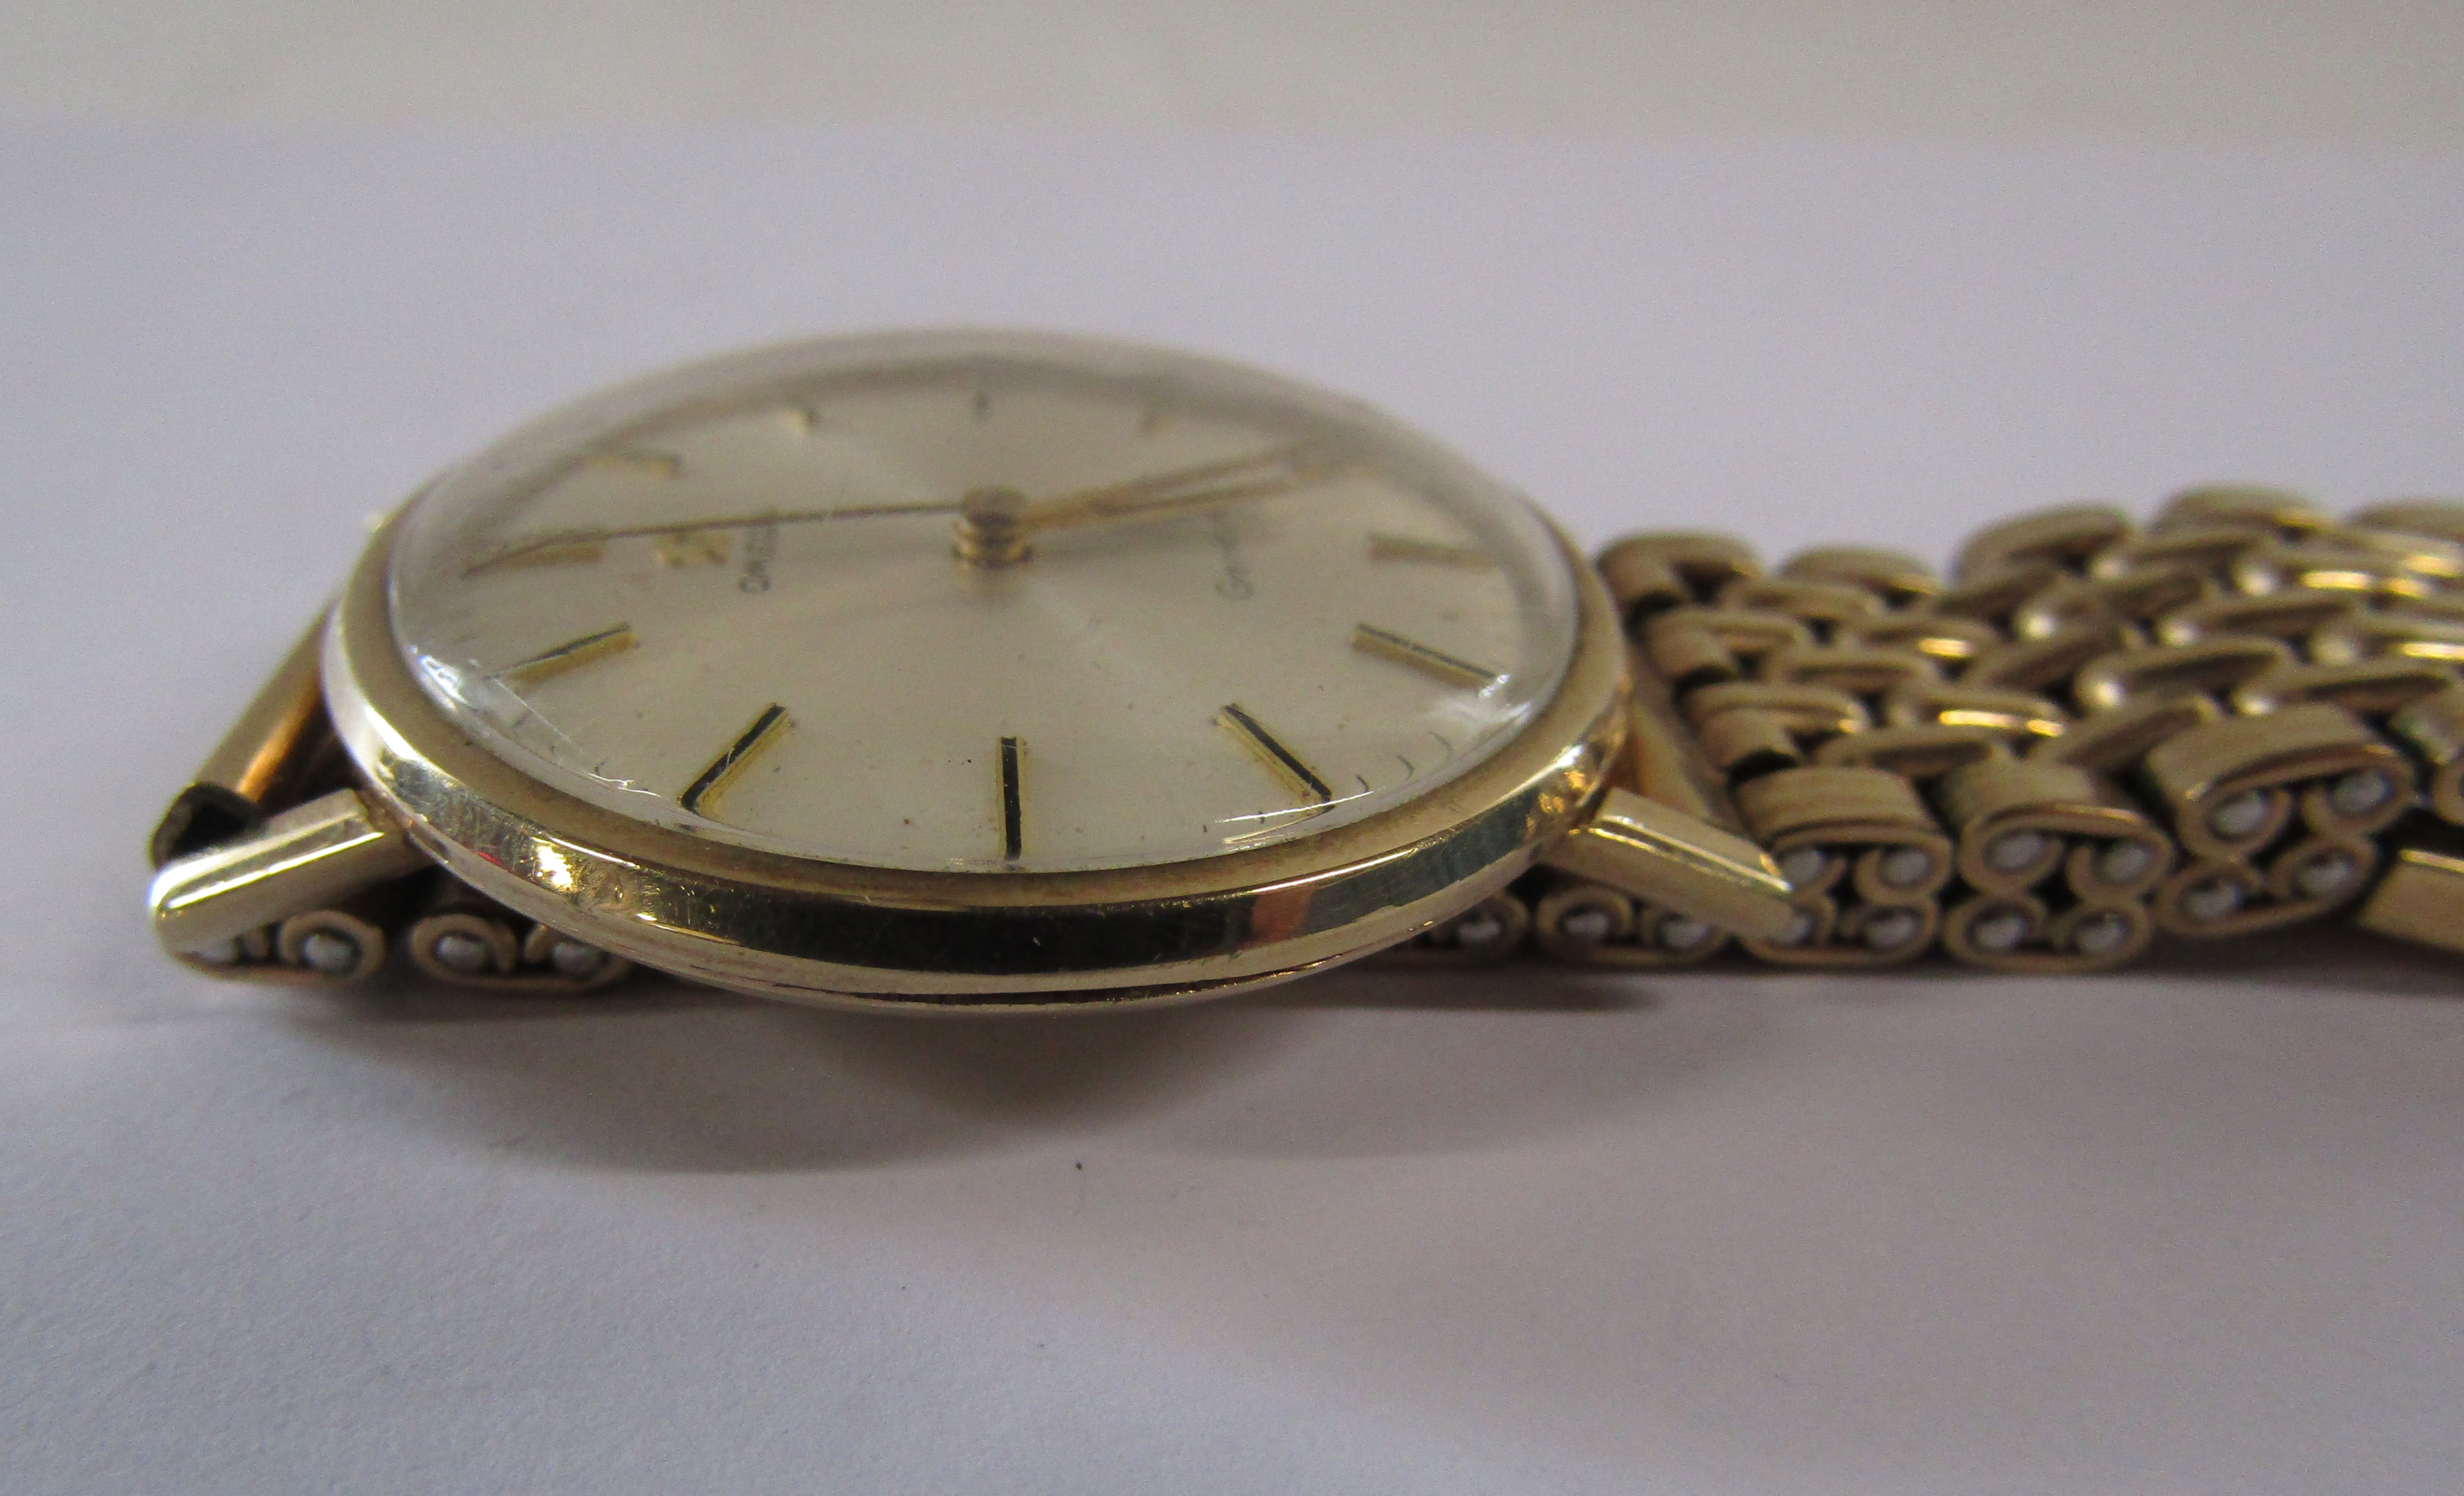 9ct Gold Omega Geneve Wristwatch - Image 4 of 8